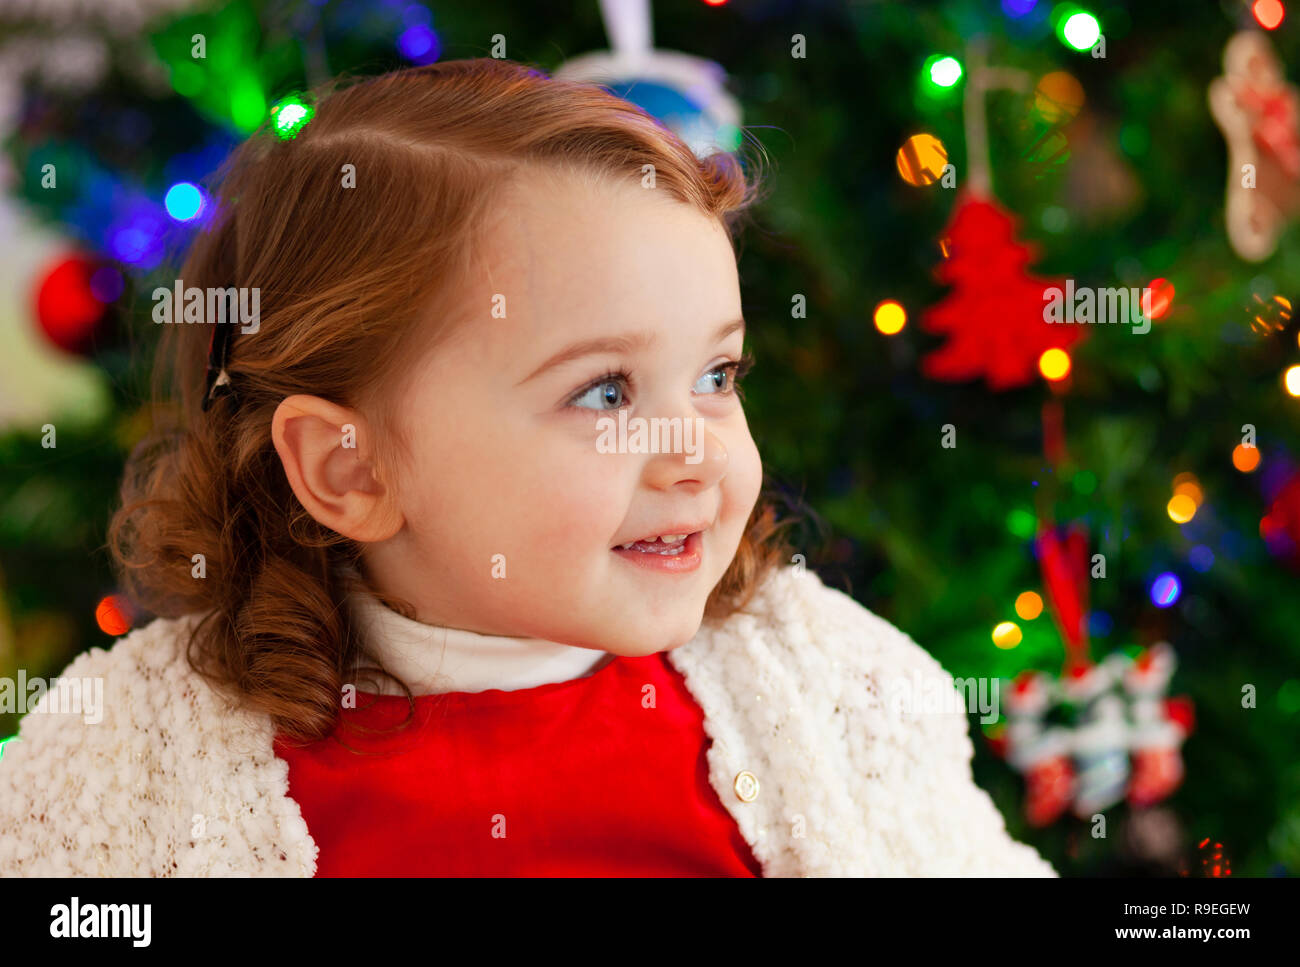 Portrait of a beautiful little child with red dress near Christmas tree. Stock Photo